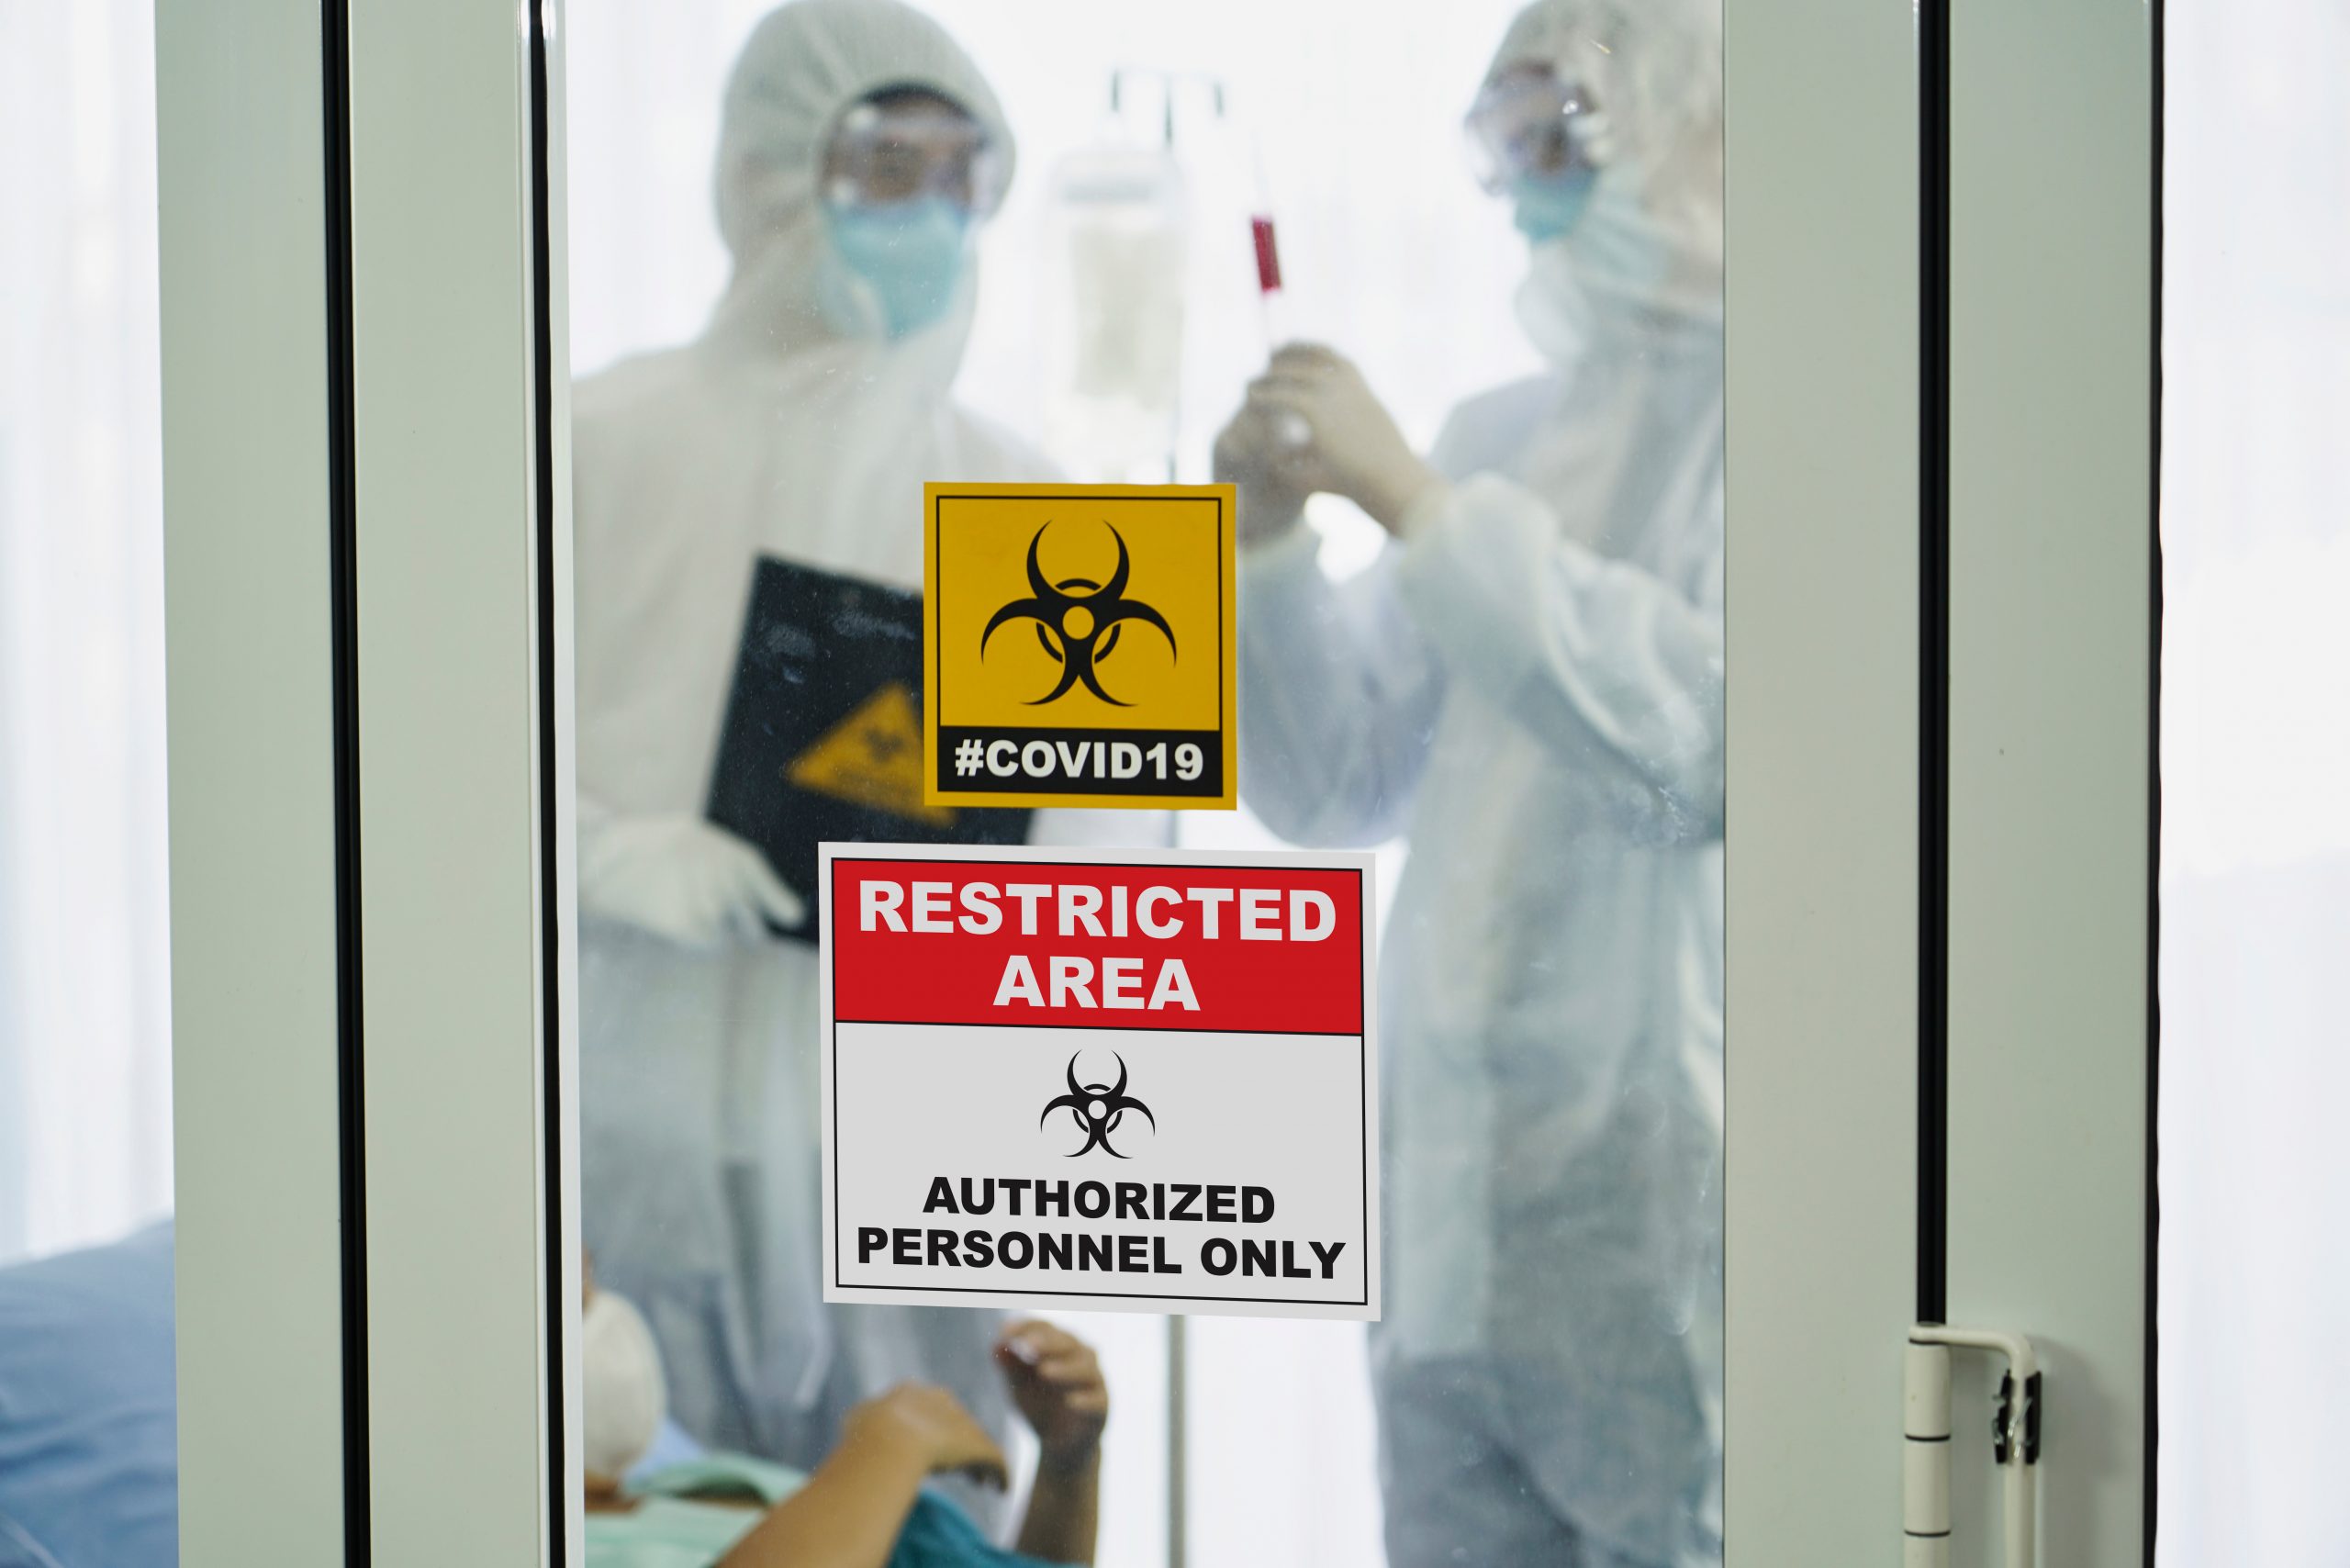 Patient and two doctors in full ppe behind a door in a hospital with restricted access and covid outbreak signs